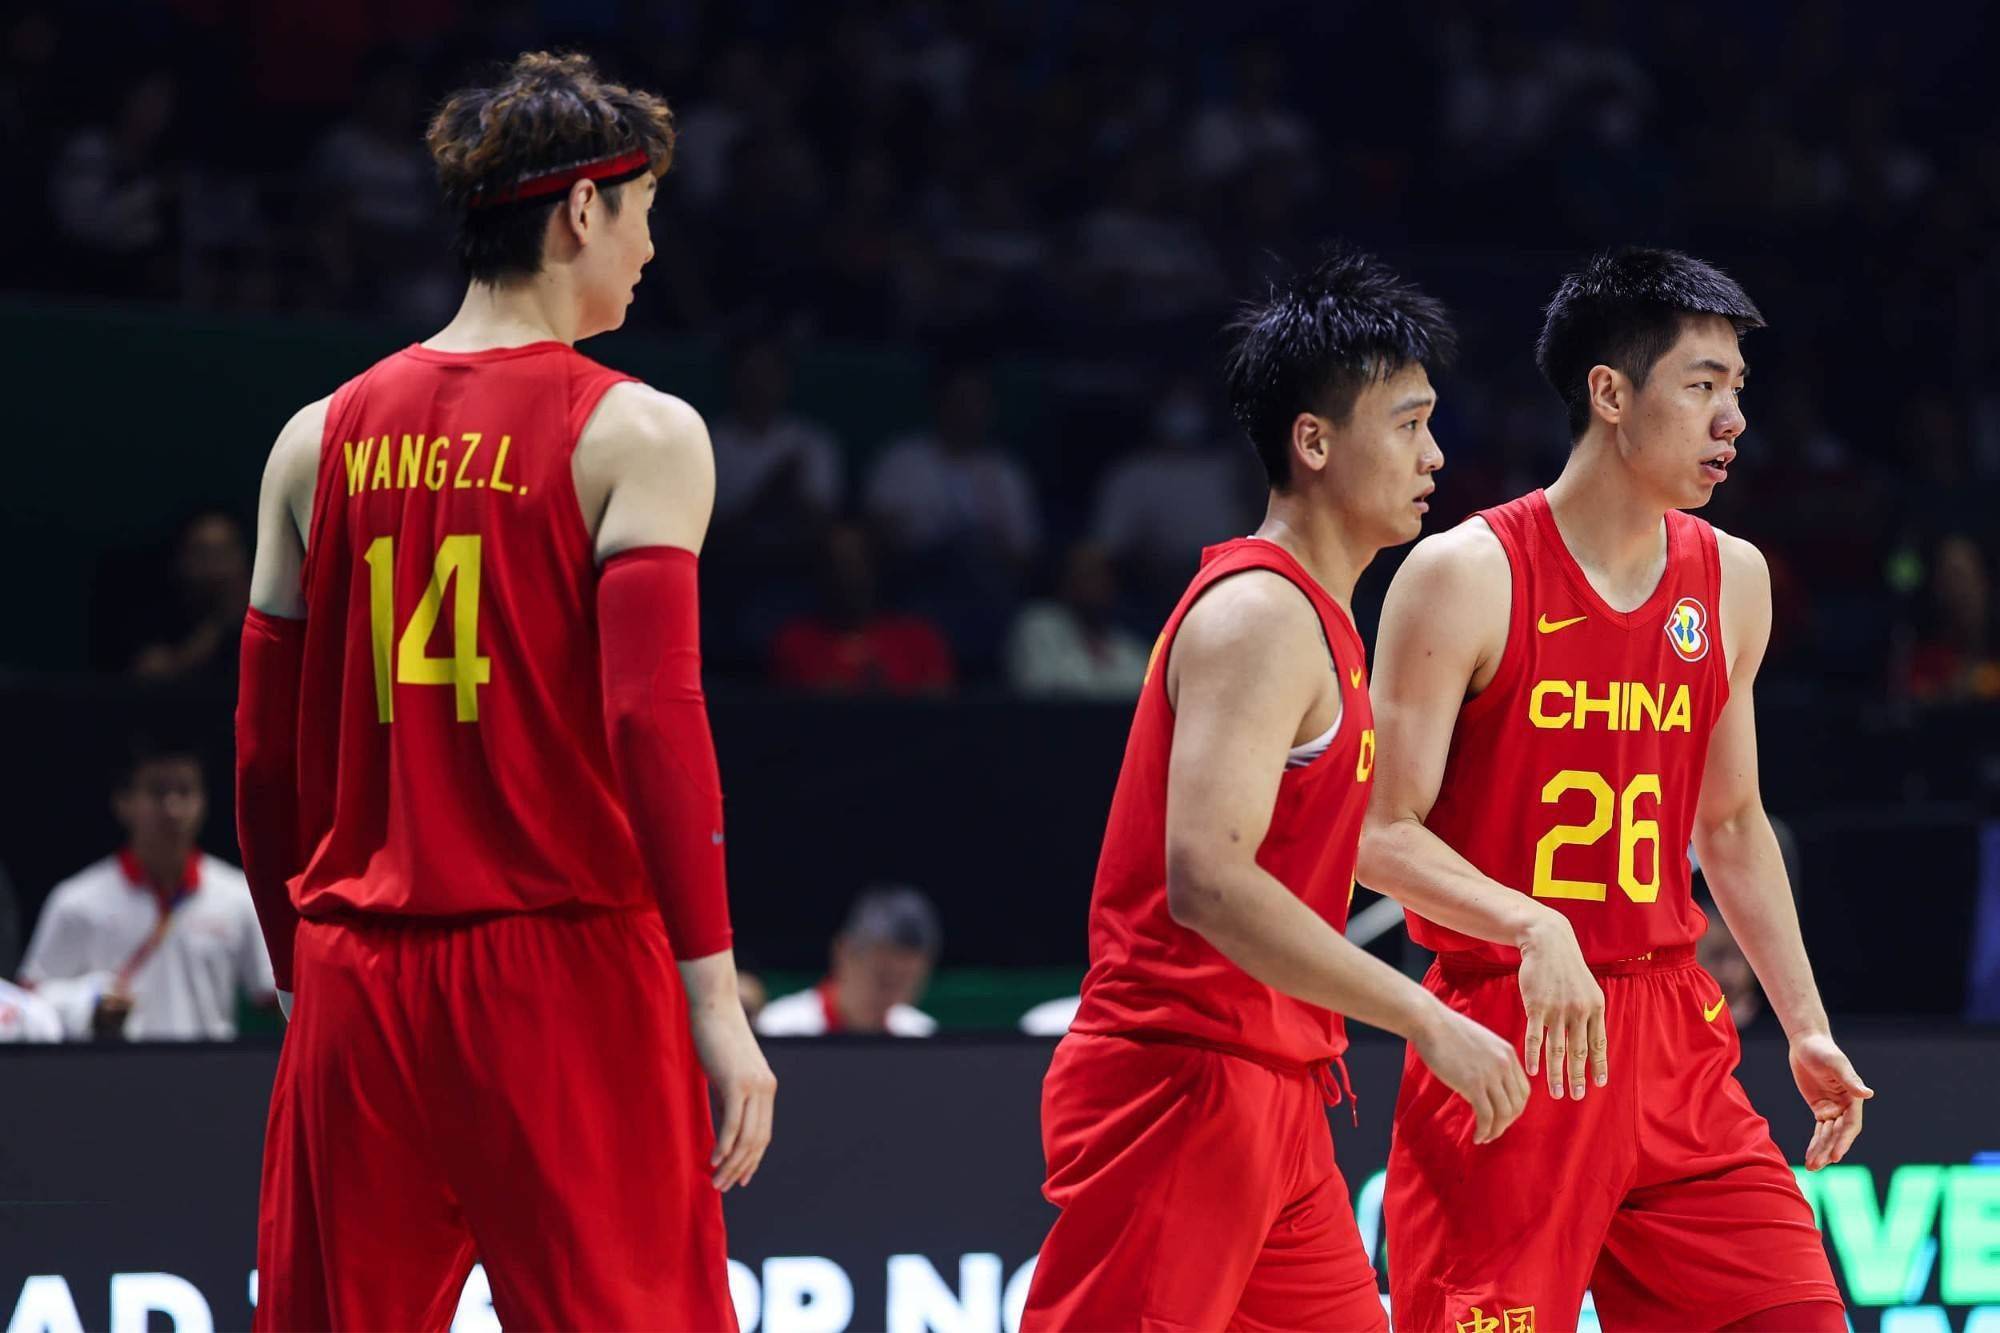 China Basketball Association: Dozens of High-Intensity Exhibition Games Scheduled for This Summer